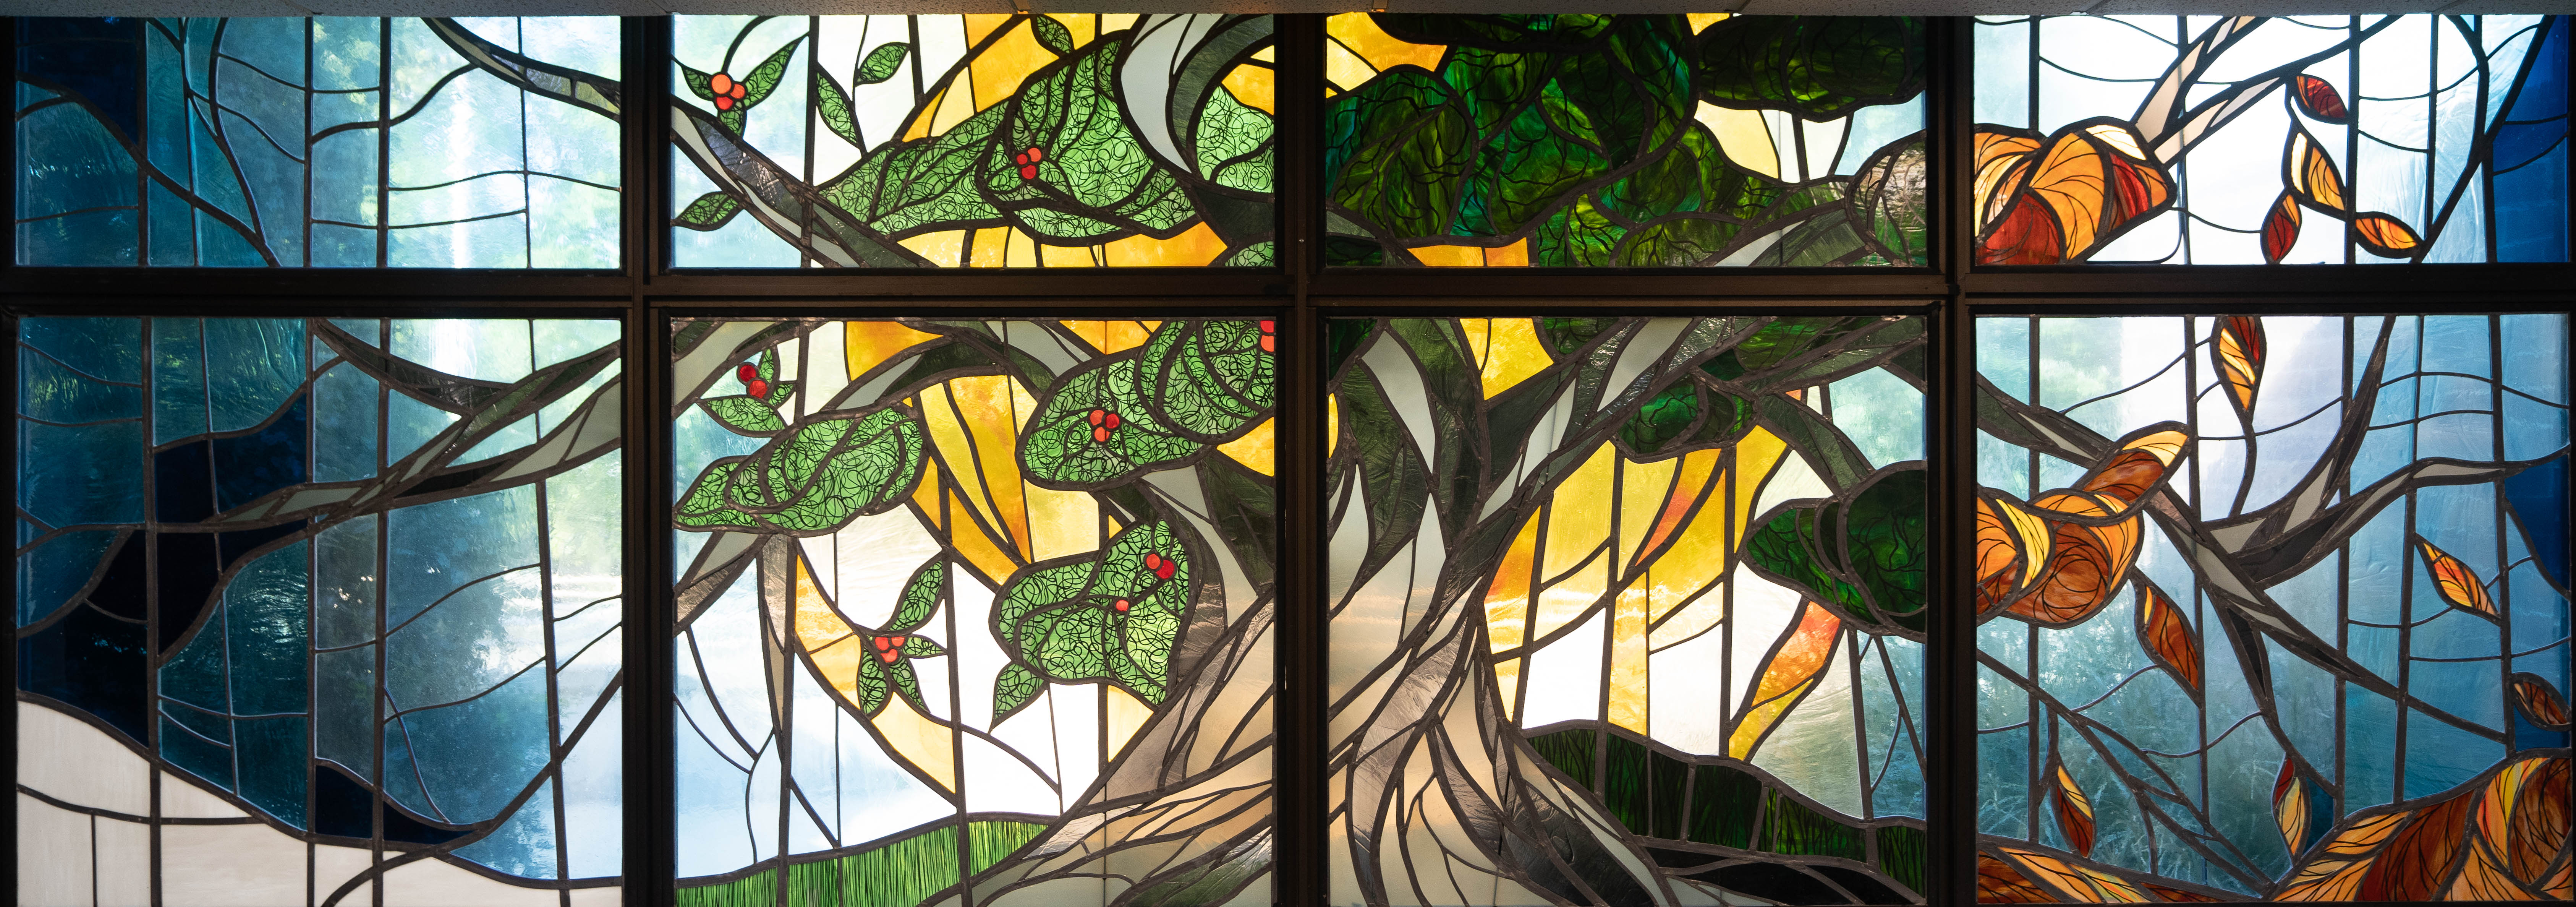 Stained glass at NE Philadelphia campus